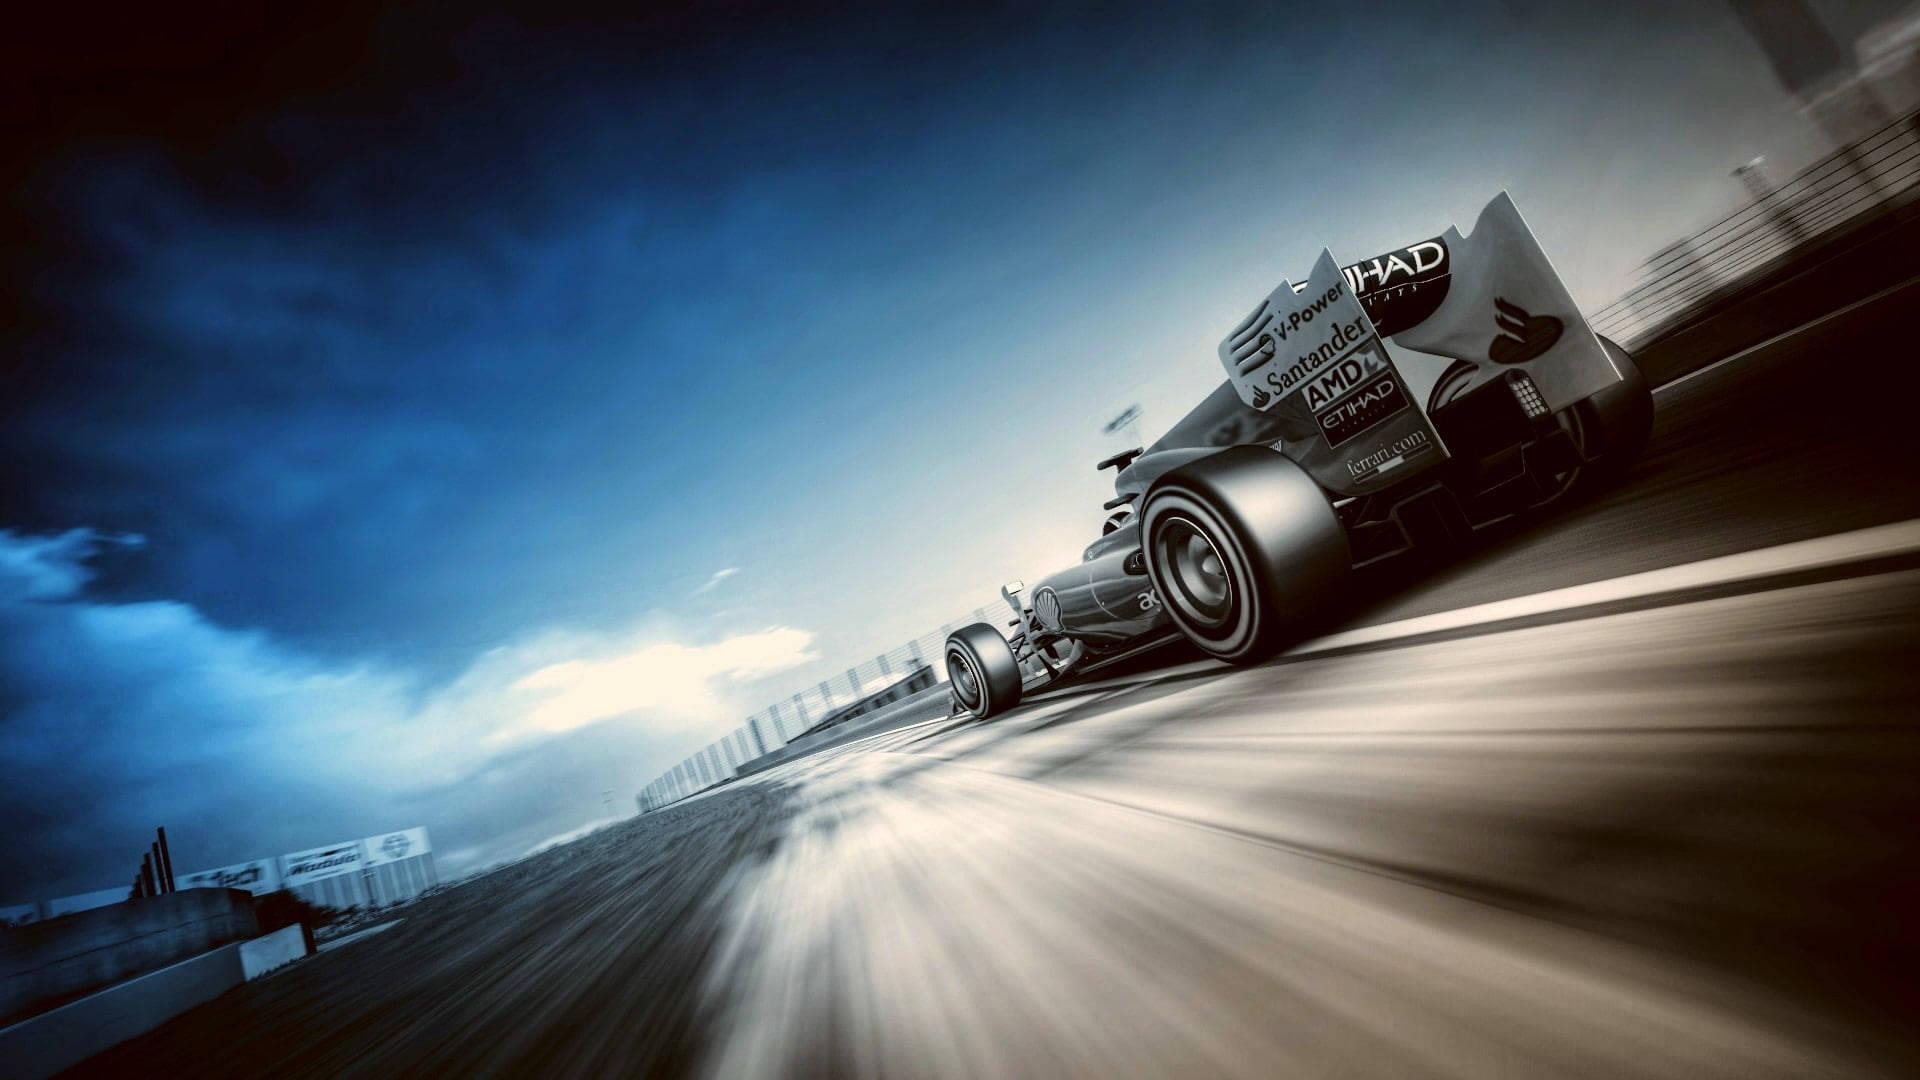 Pulse Of The Race - Thrilling F1 Racing Fan Art Background